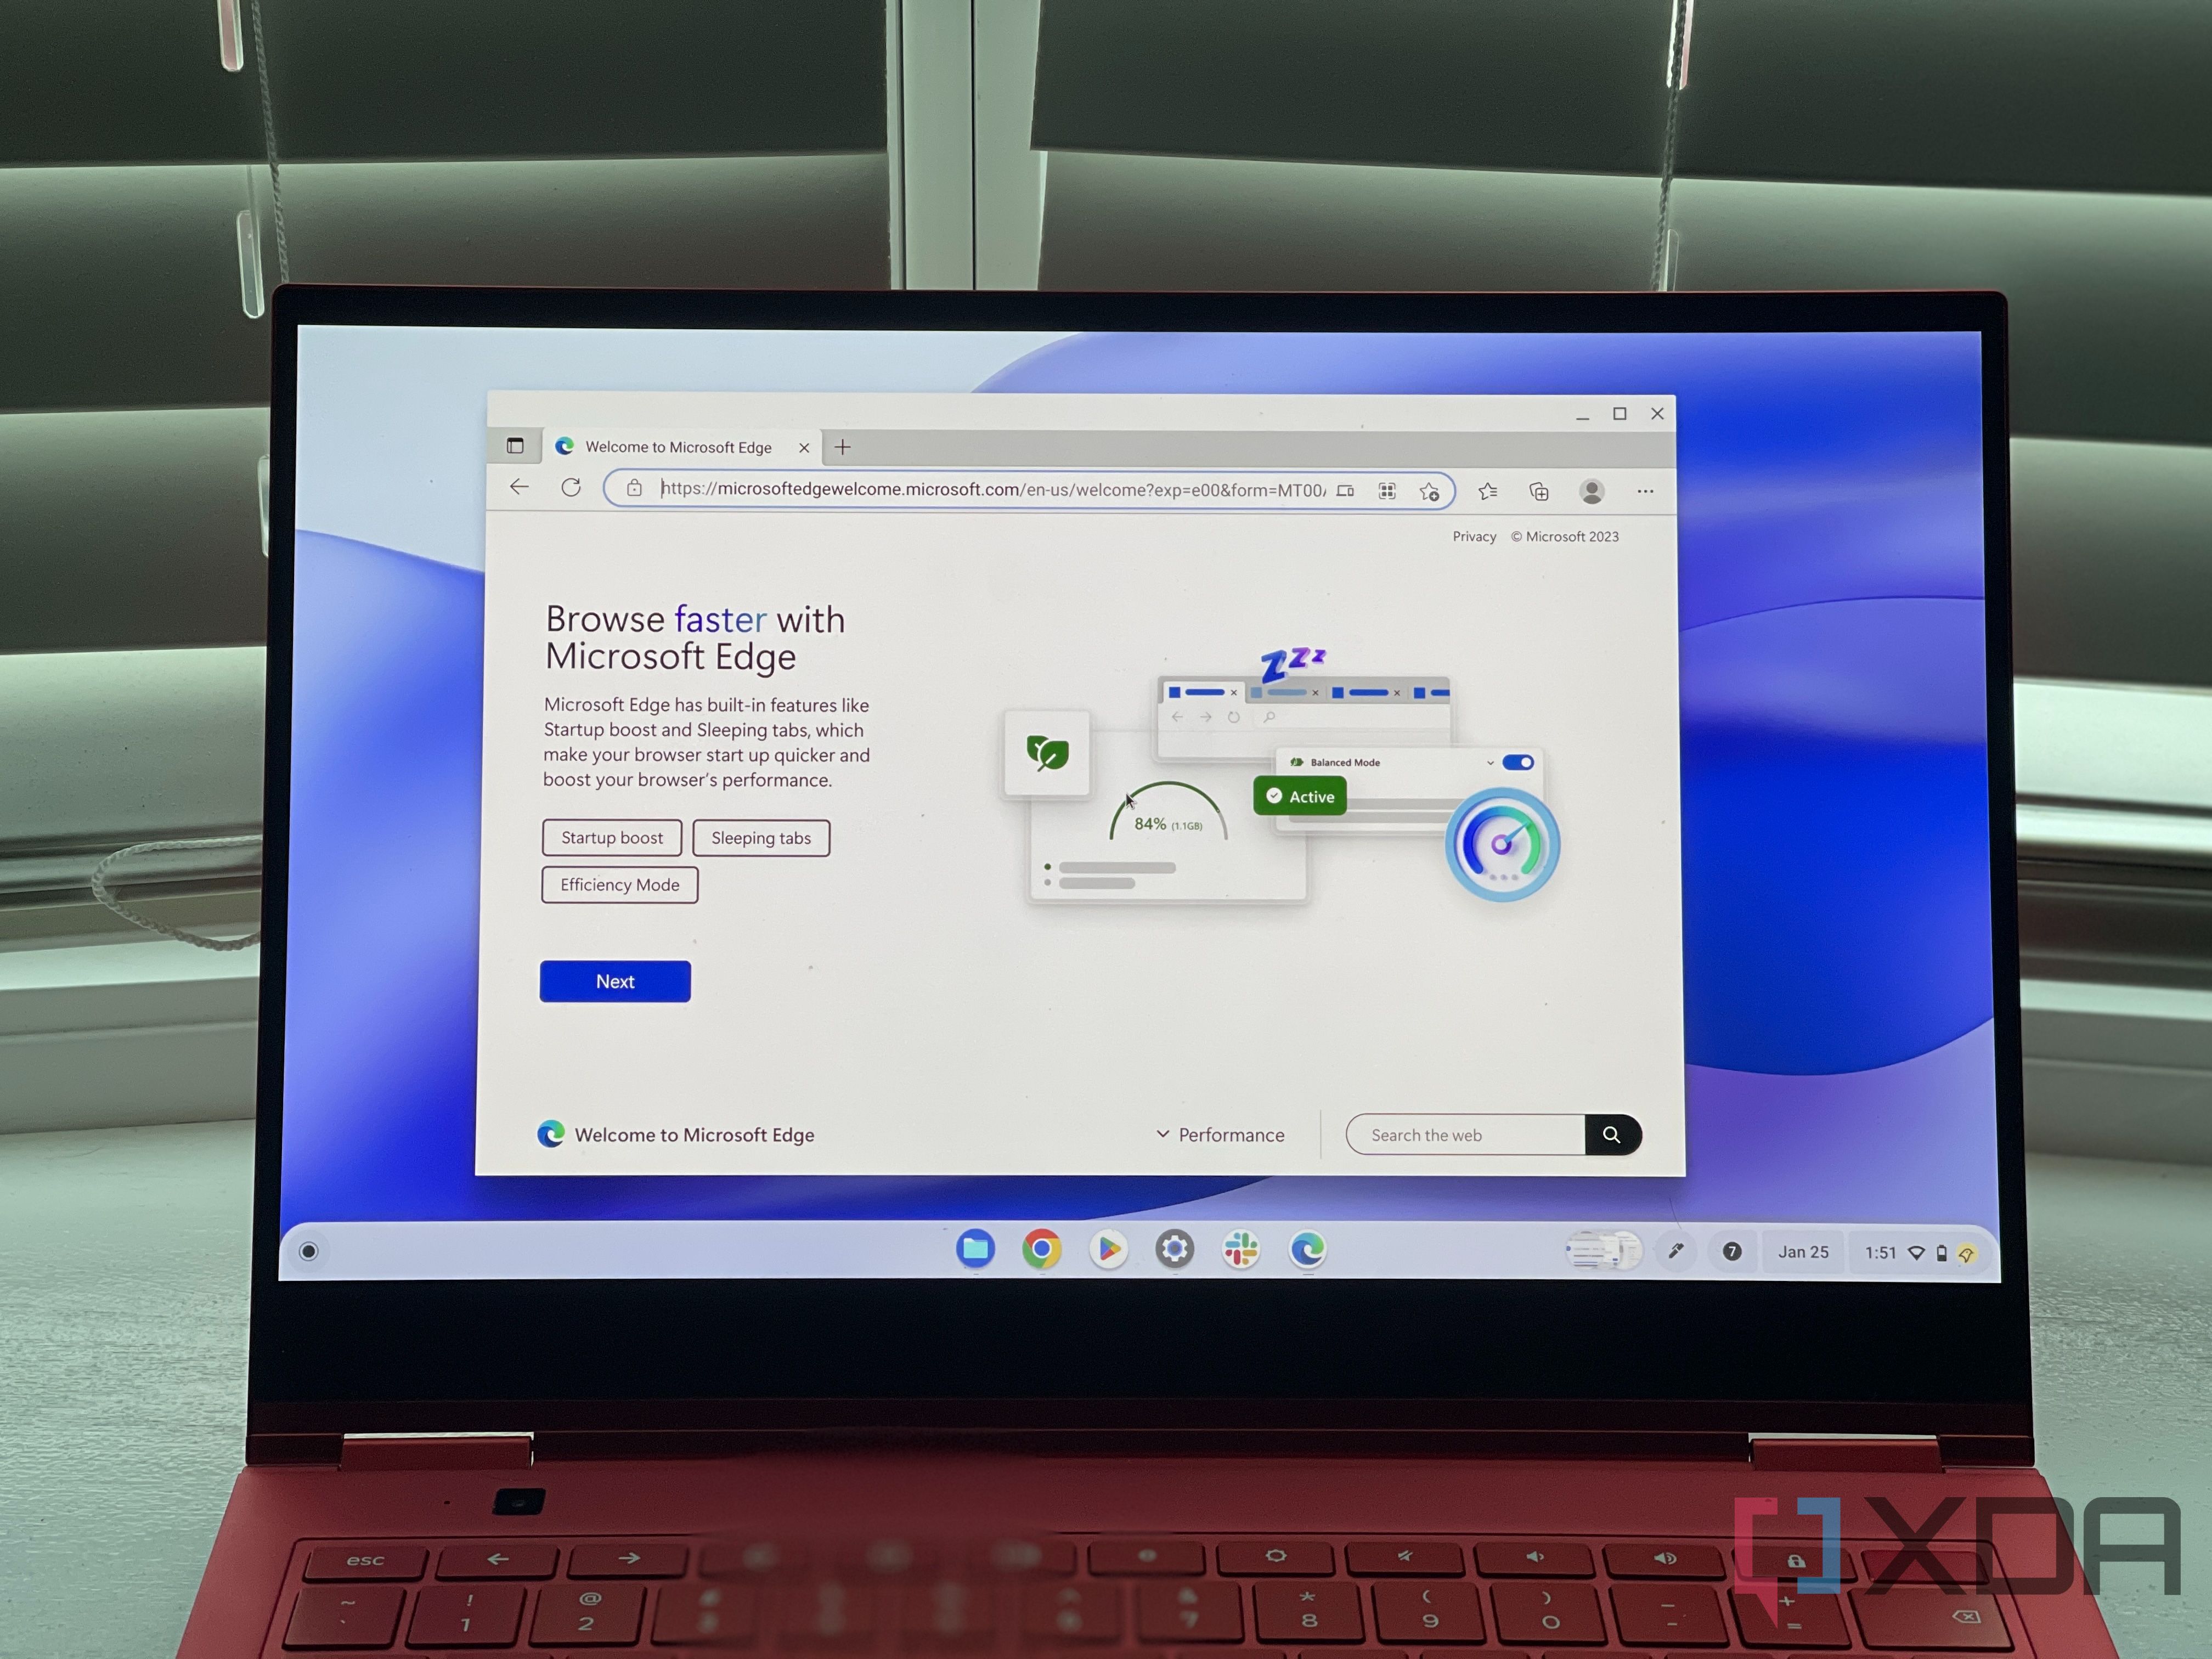 Here's how you can install Microsoft Edge on Chrome OS, even though it is not supported